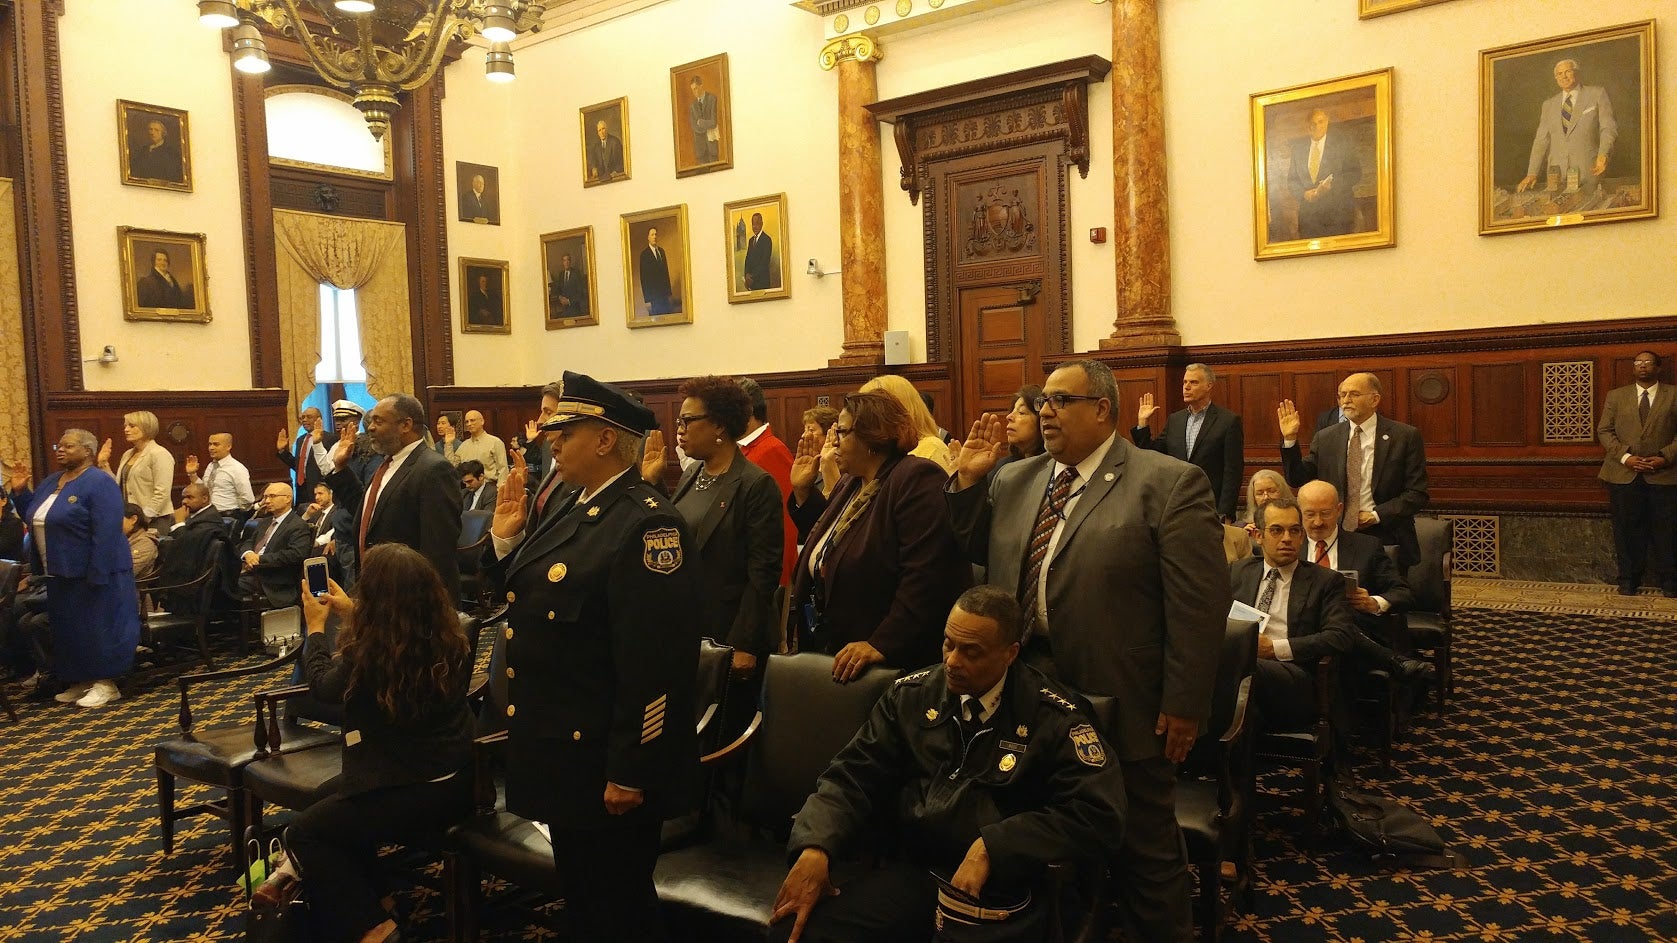  A new crop of Philadelphia integrity officers taking the oath of office Wednesday. (Tom MacDonald/WHYY) 